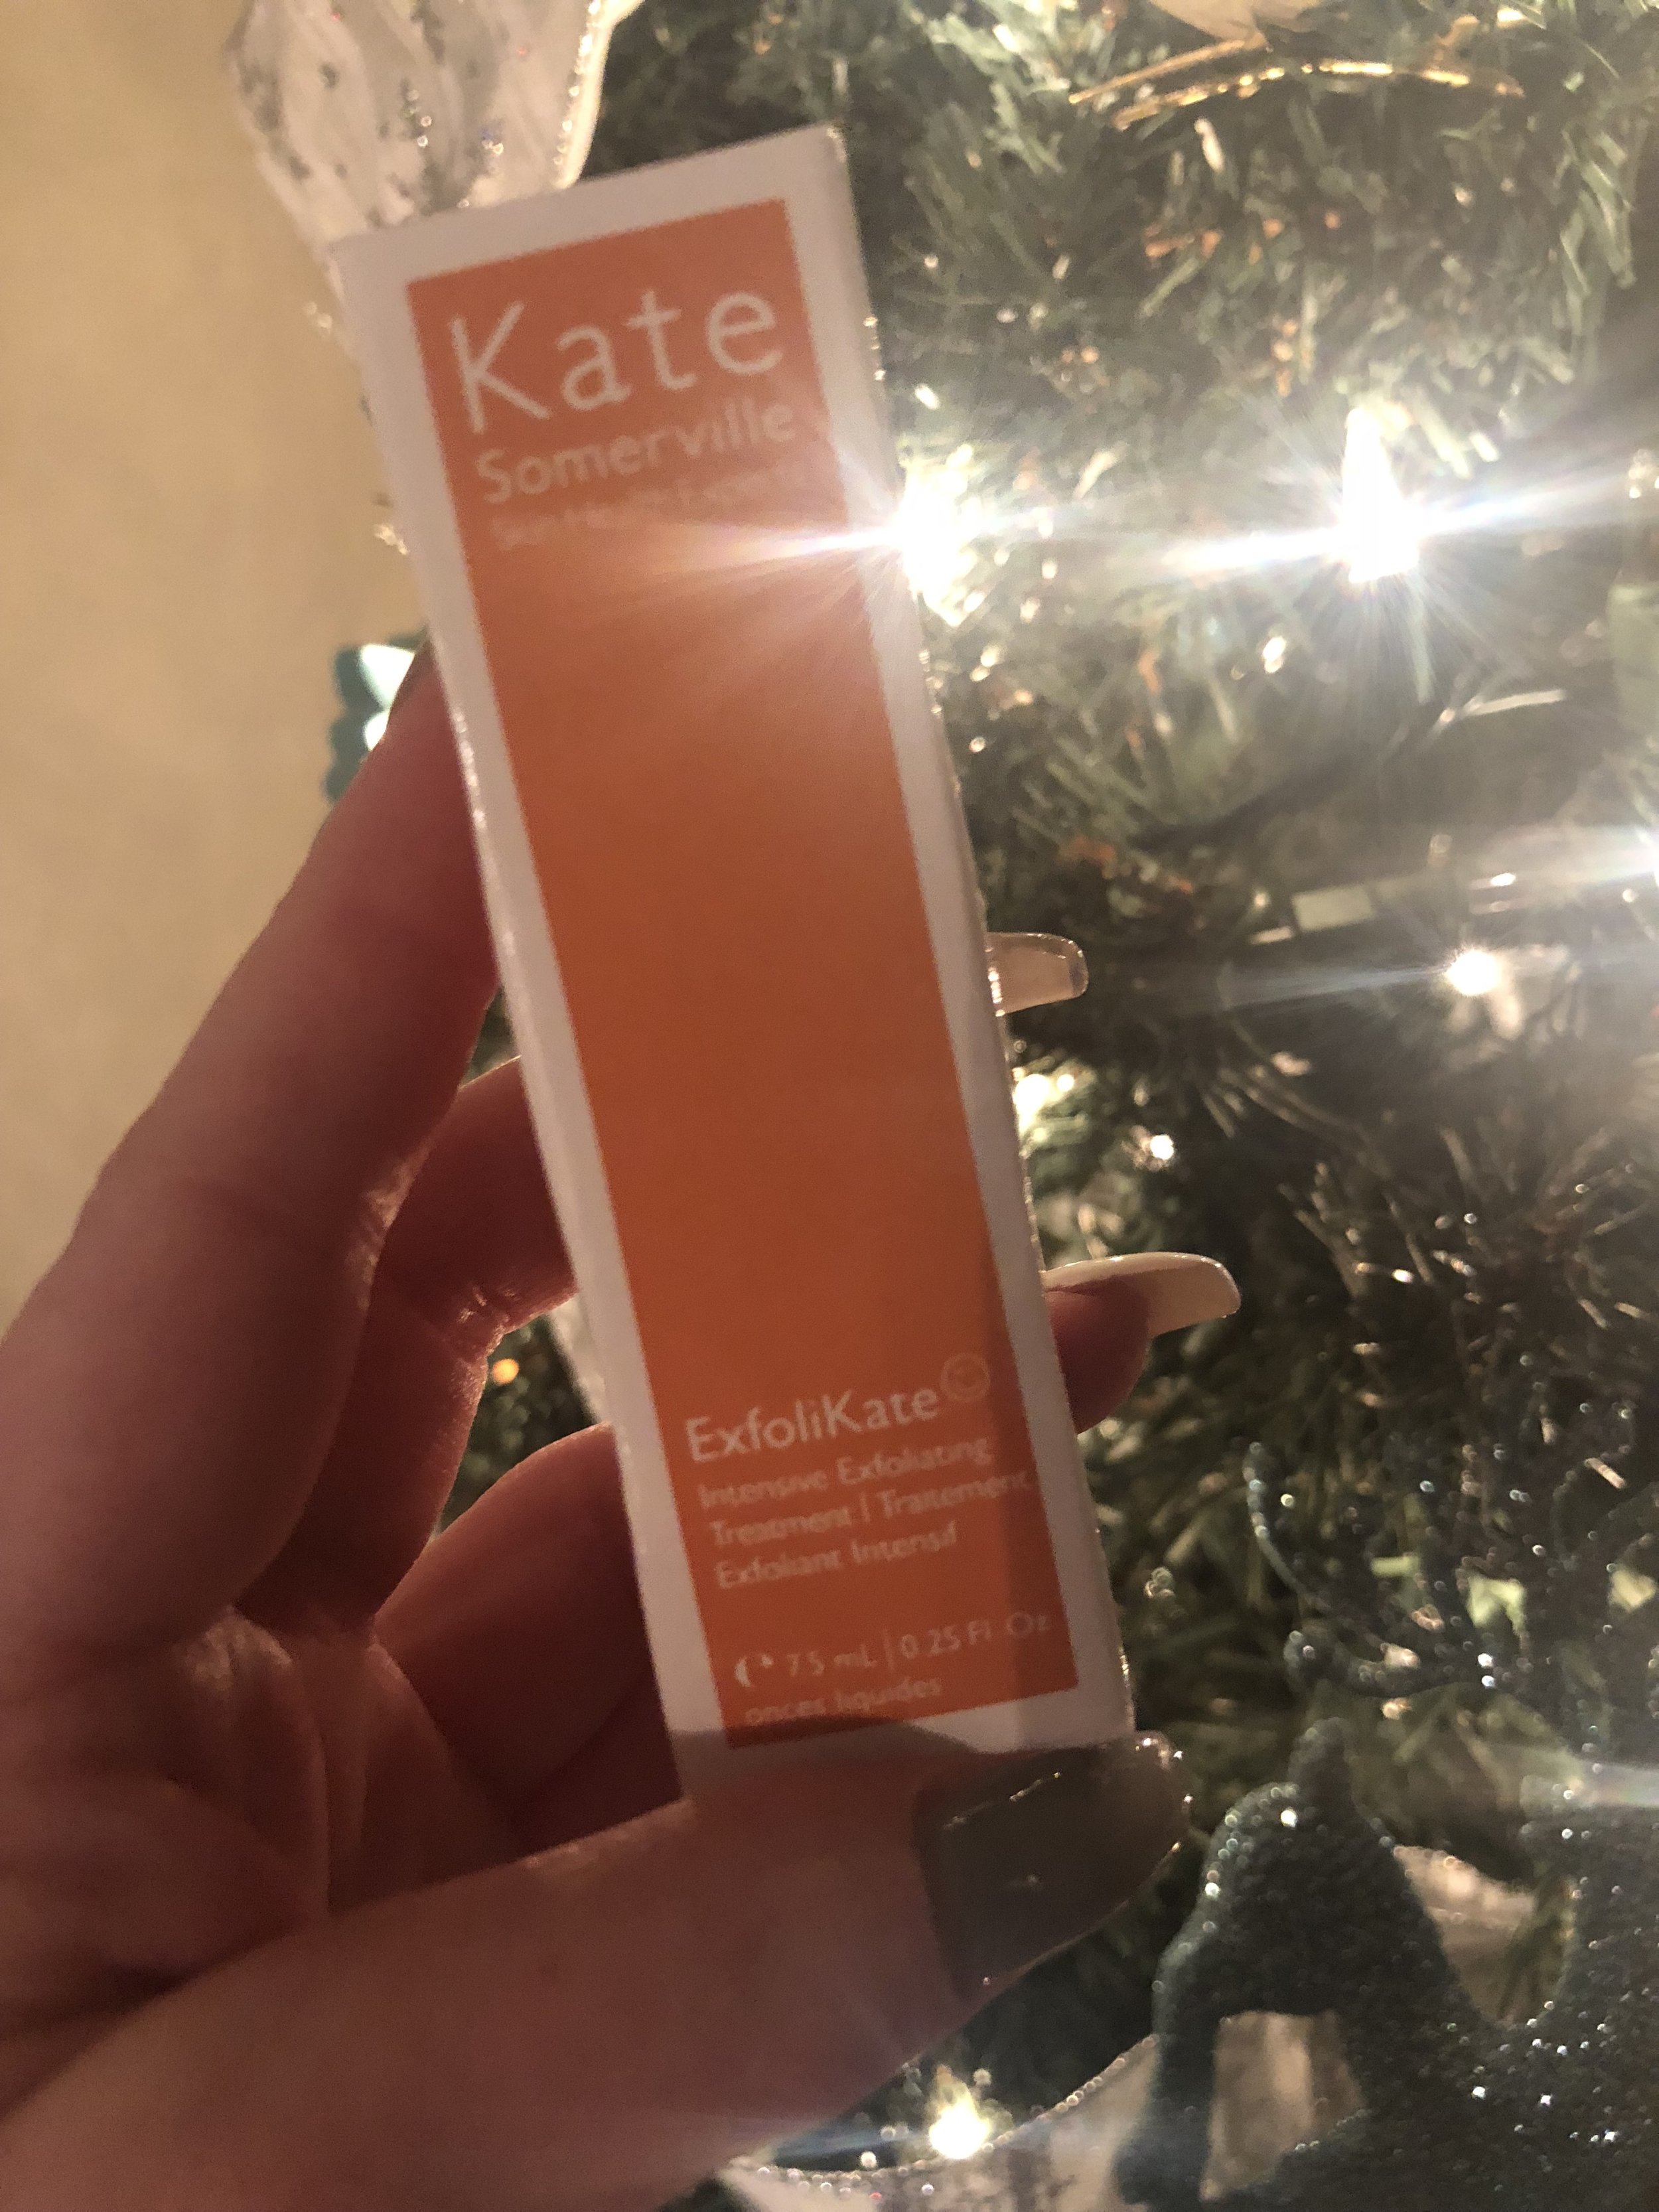 Copy of December 6th:  Kate Somerville Exfolicate